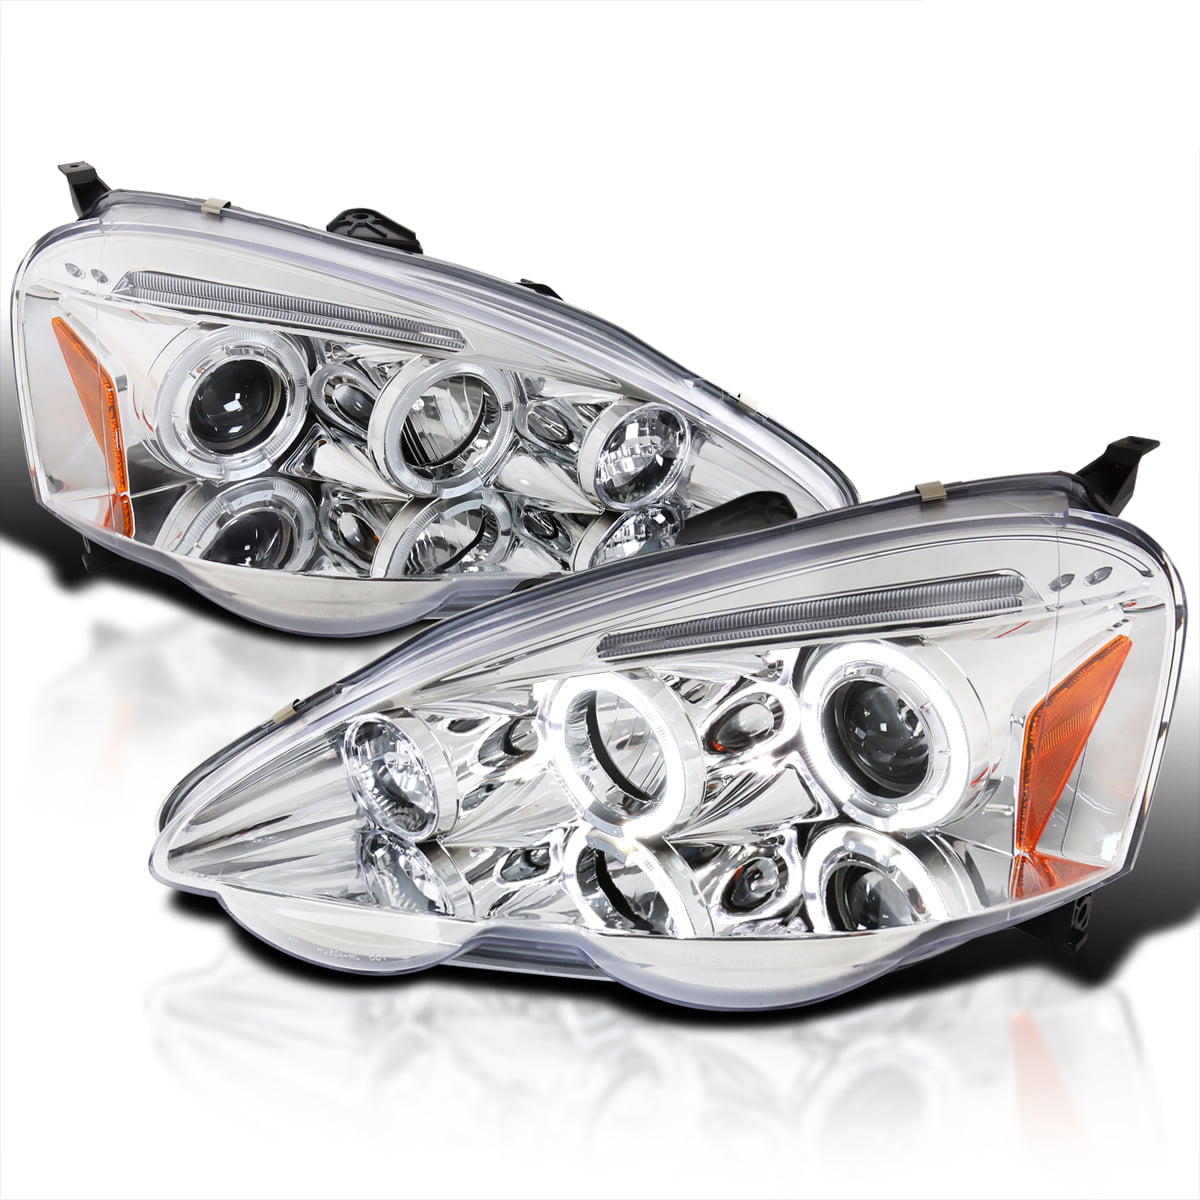 FOR 05-06 ACURA RSX CCFL HALO LED BLACK PROJECTOR HEADLIGHT LAMP LEFT+RIGHT PAIR